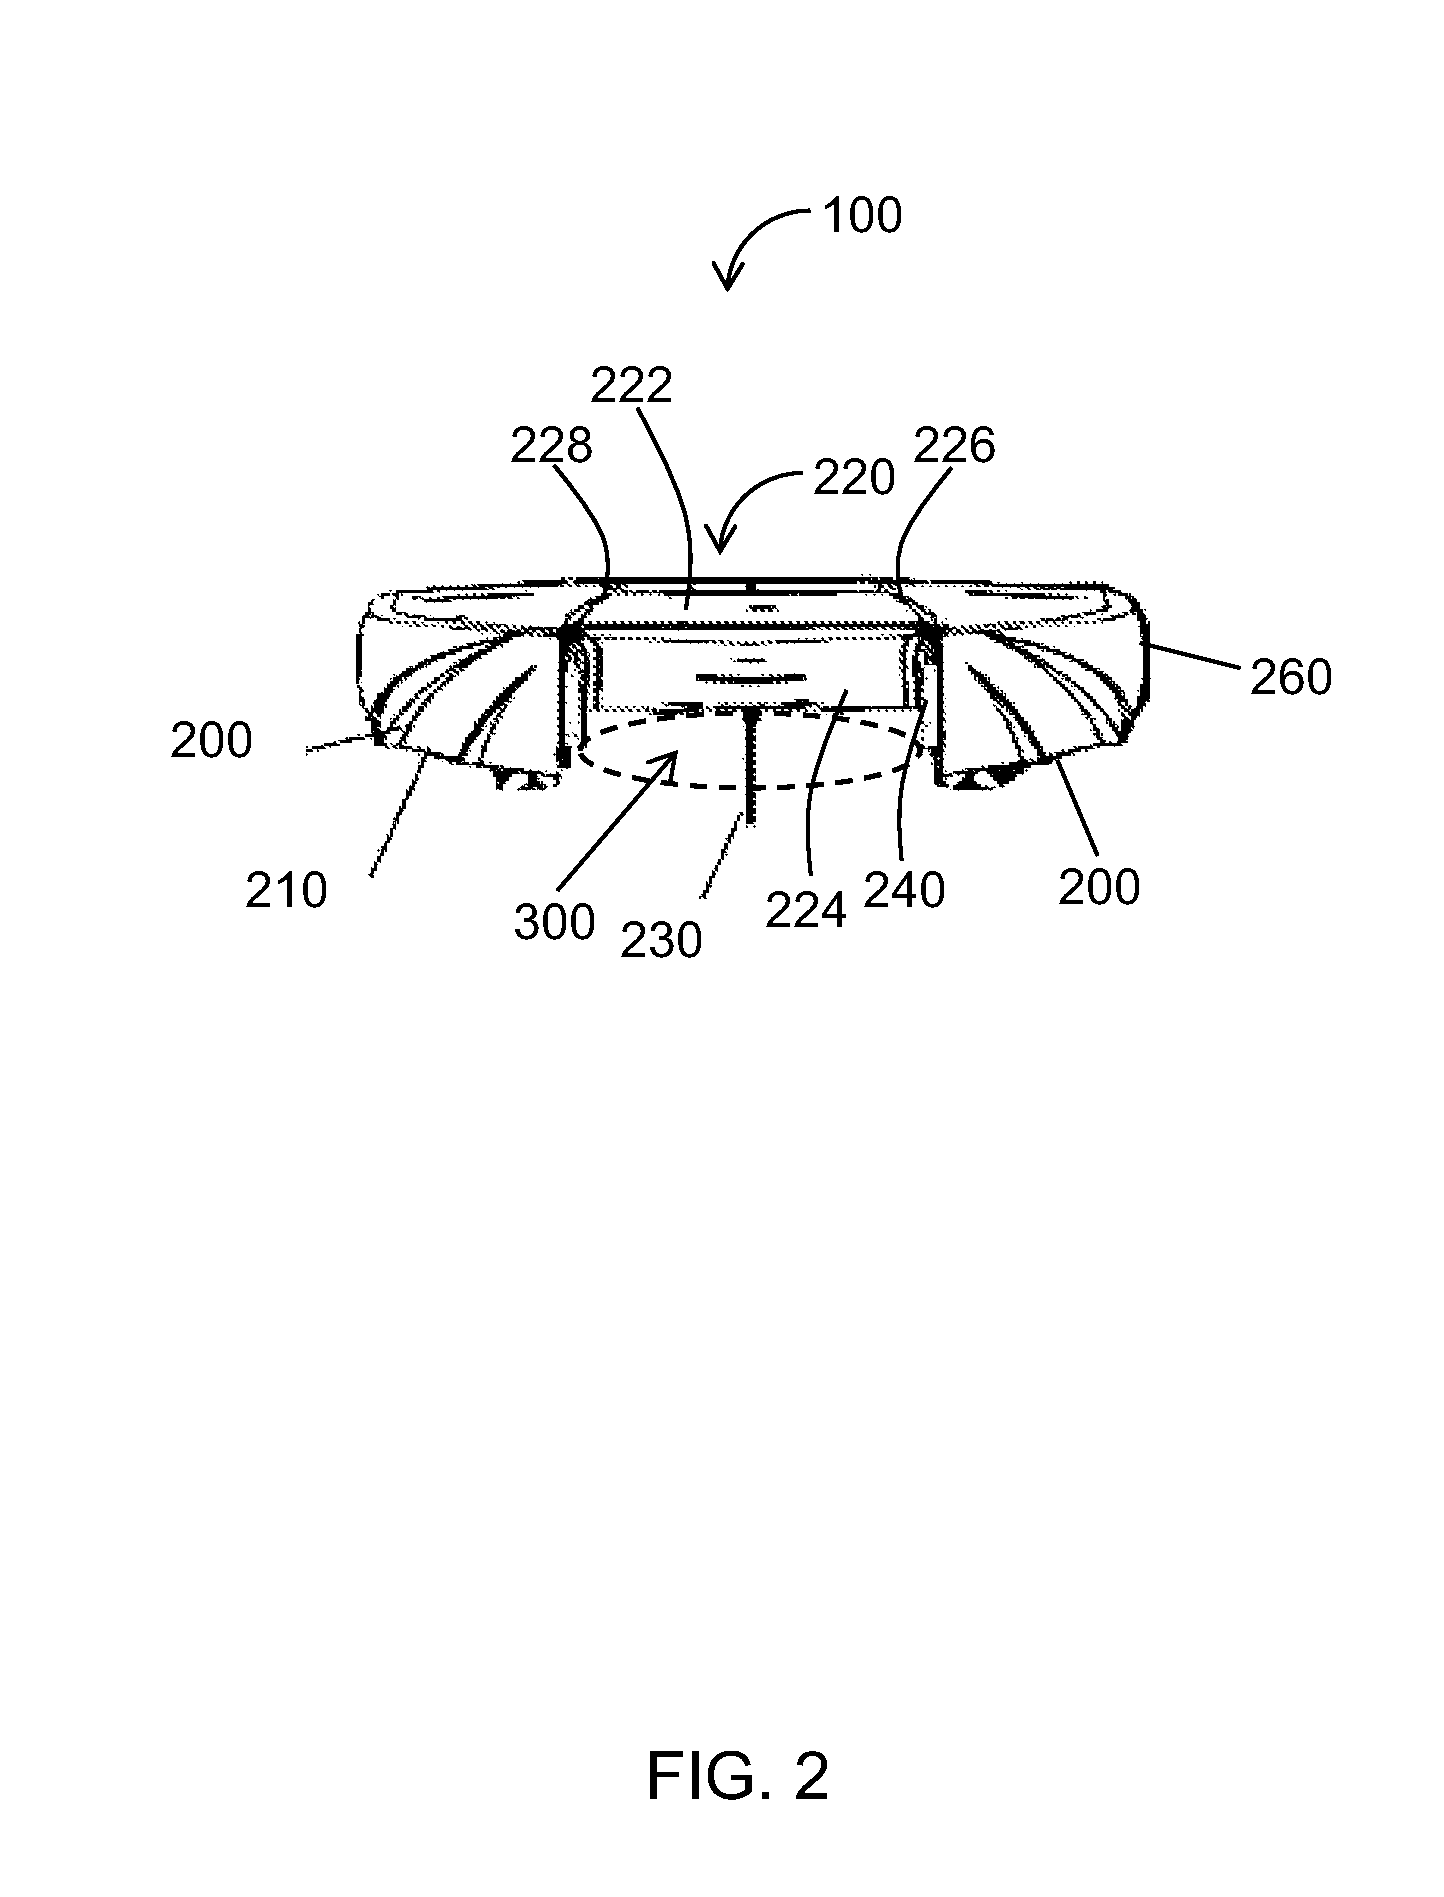 Multi-role unmanned vehicle system and associated methods